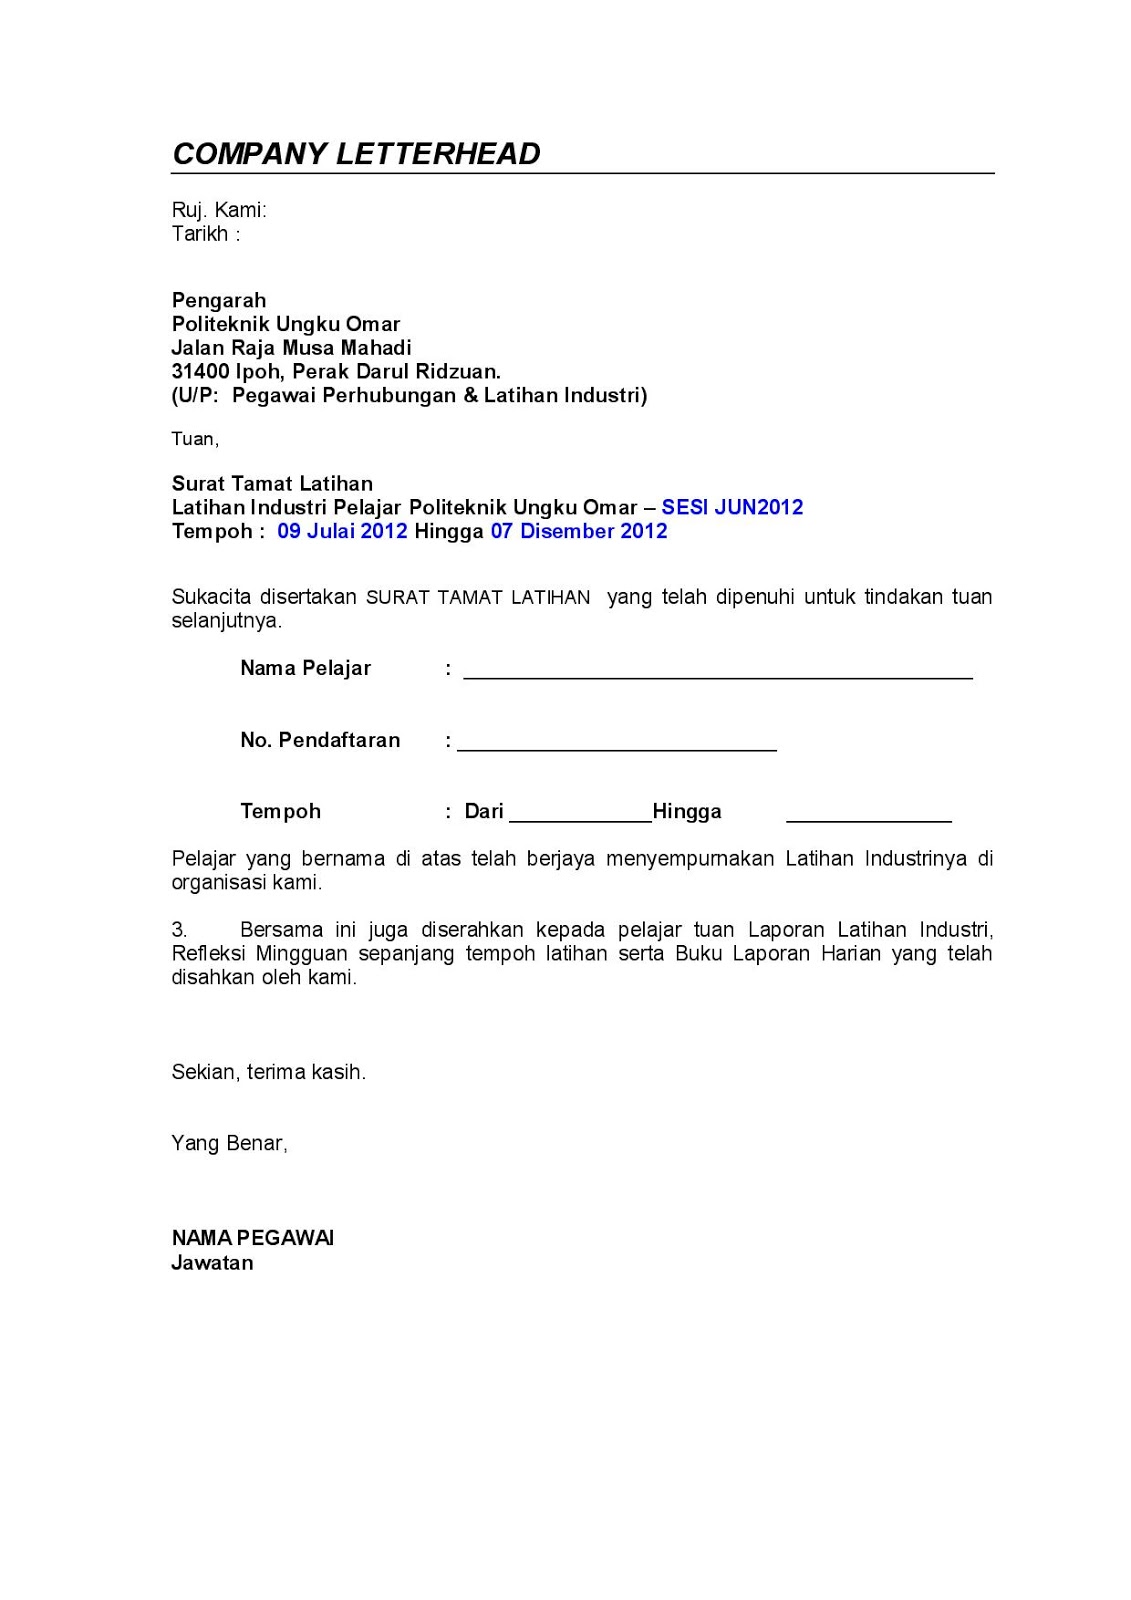 Loan Cover Letter: Bank Statement Request Letter Format, Loan ...